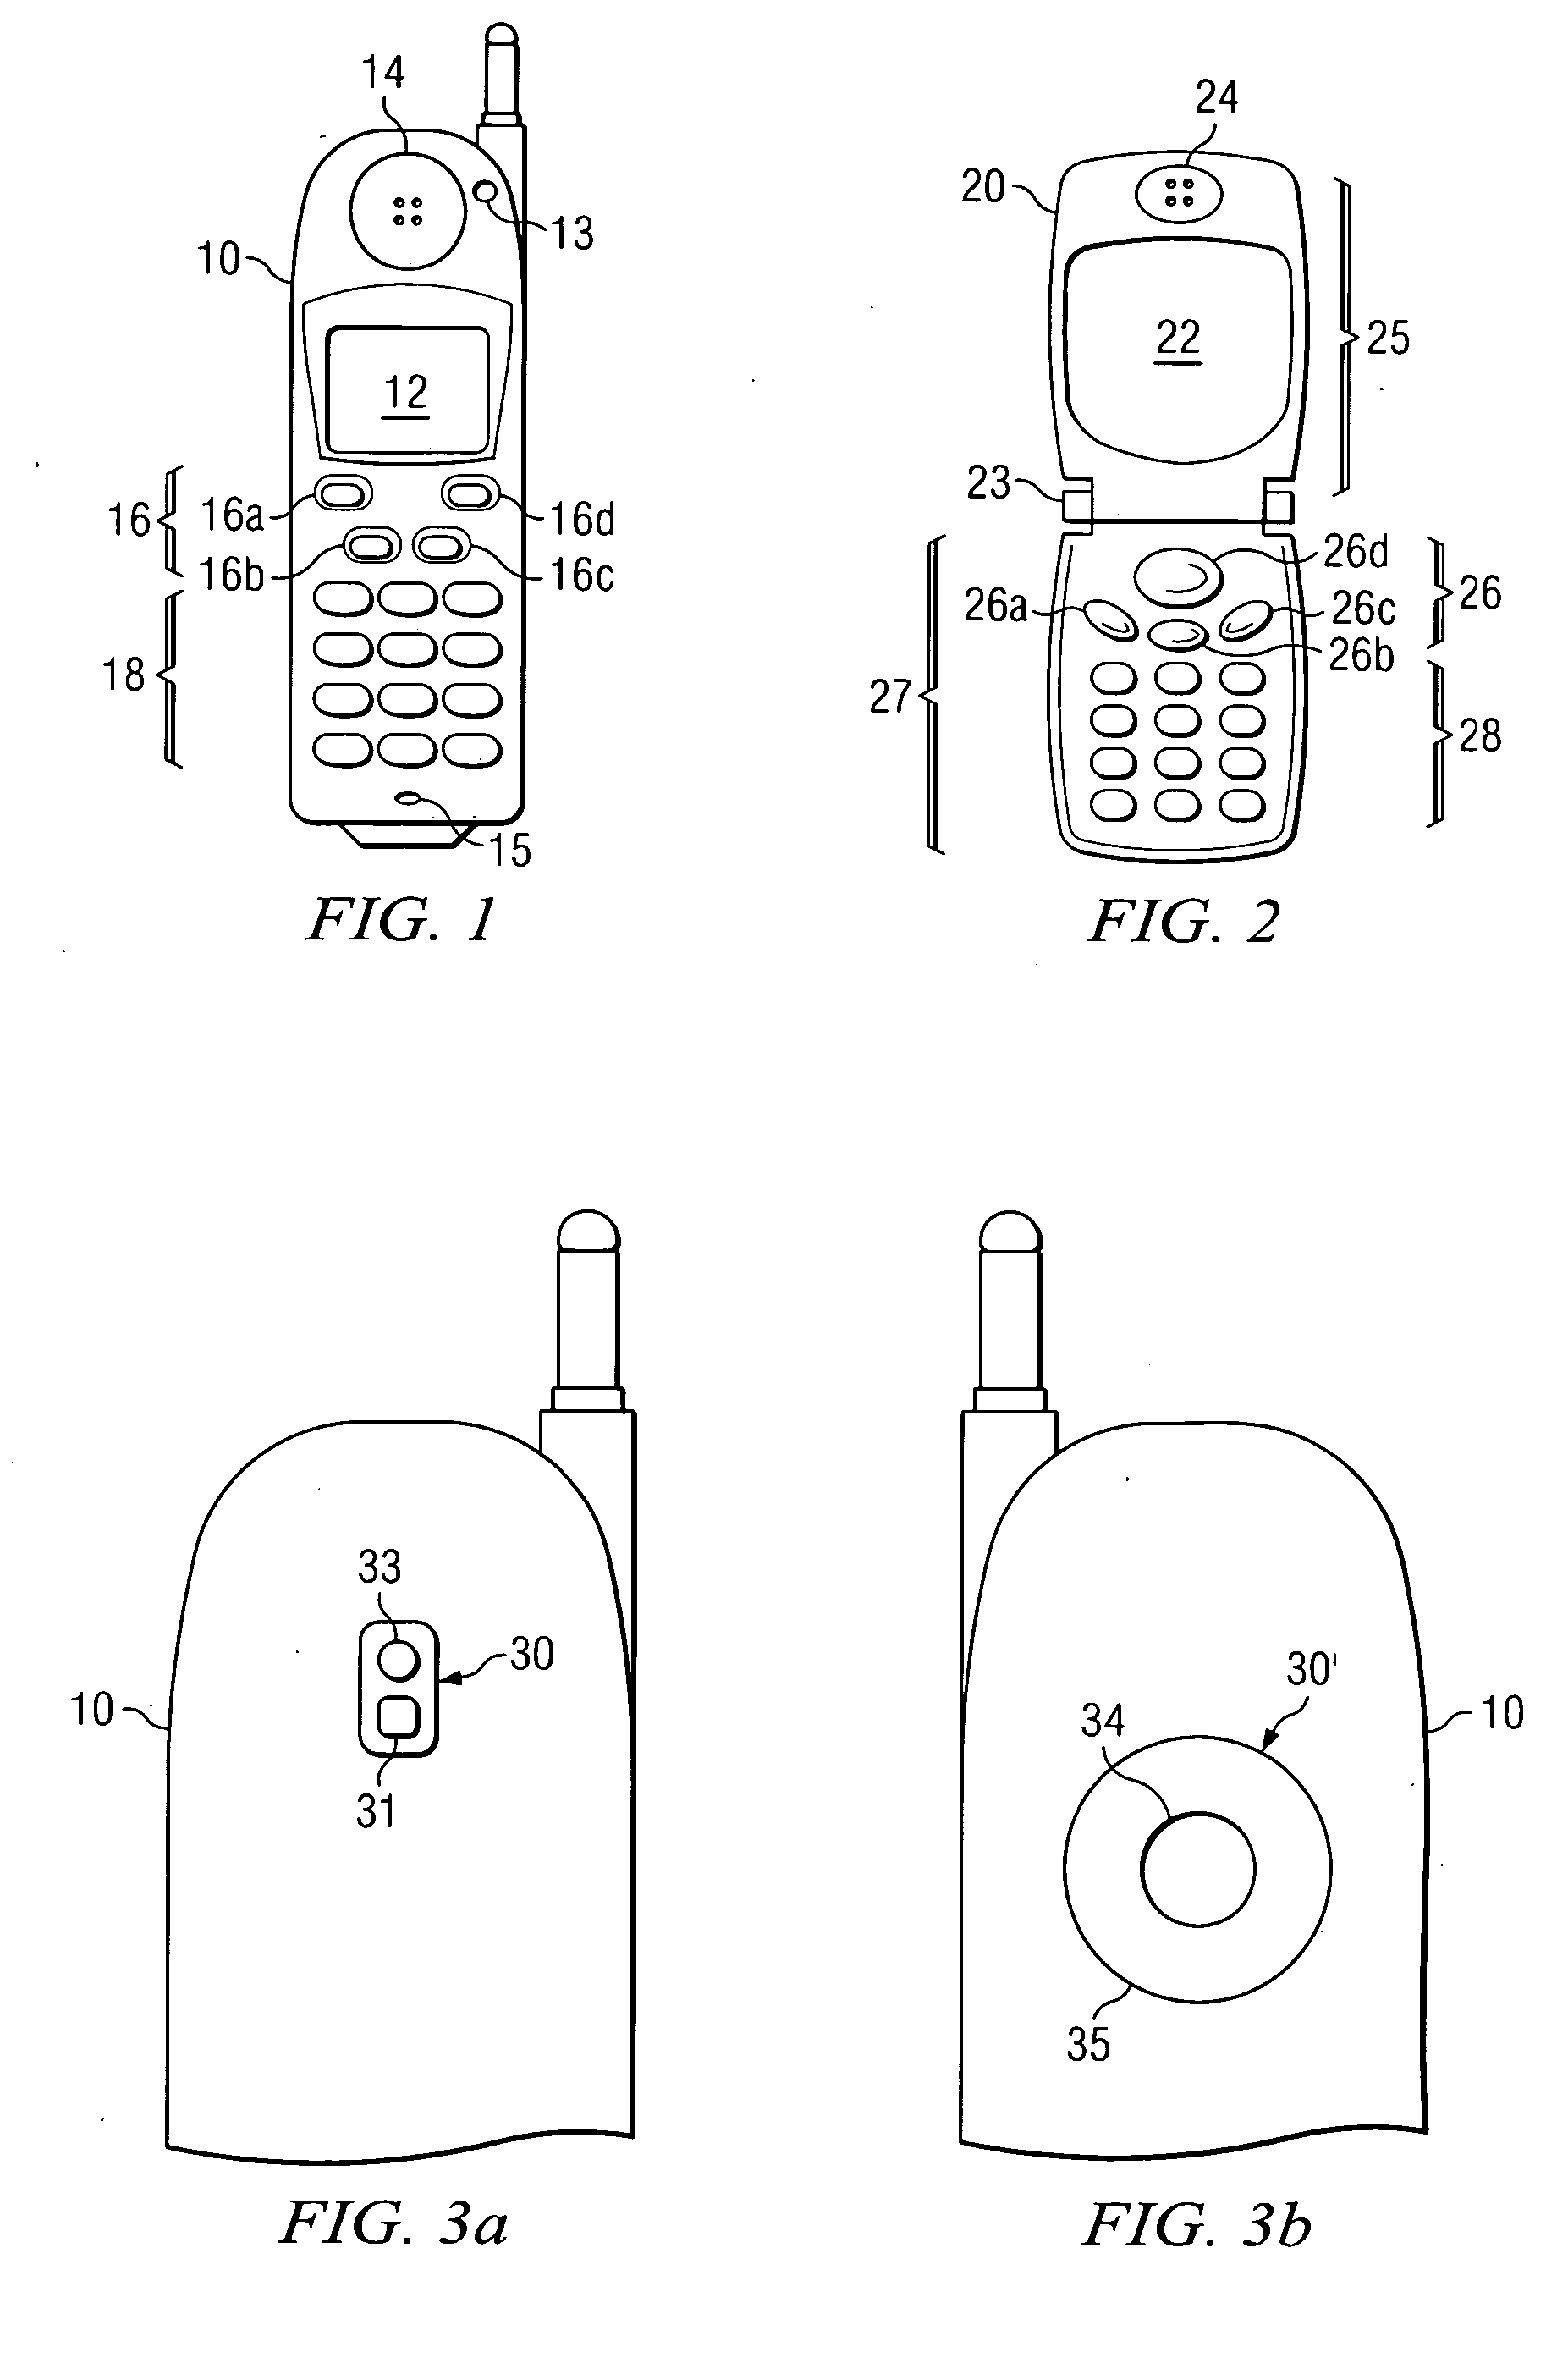 Wireless telephone handset with internet browsing capability